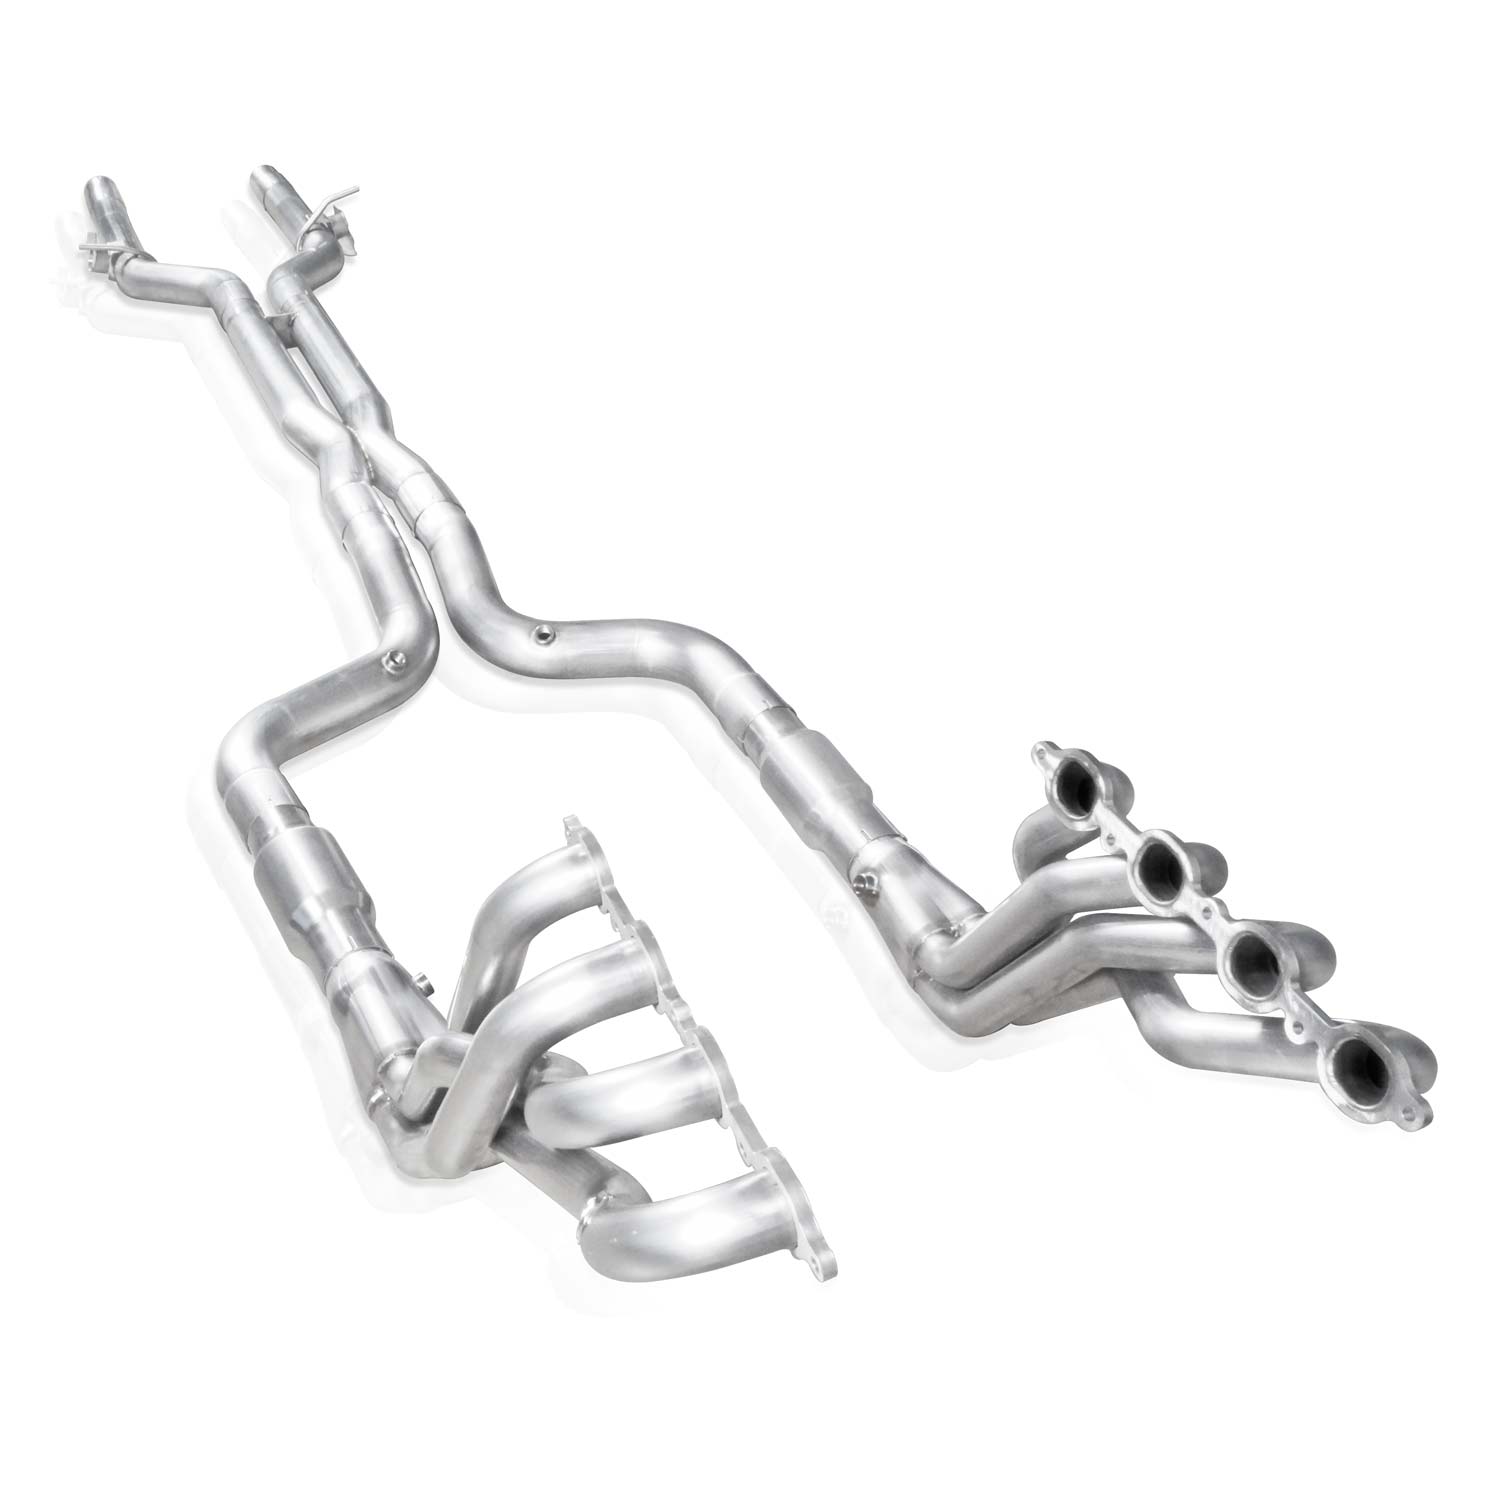 2016-2021 Camaro SS 6.2L SW Headers 1-7/8" Pri. X-Pipe Catted, Valve Delete Factory Connect